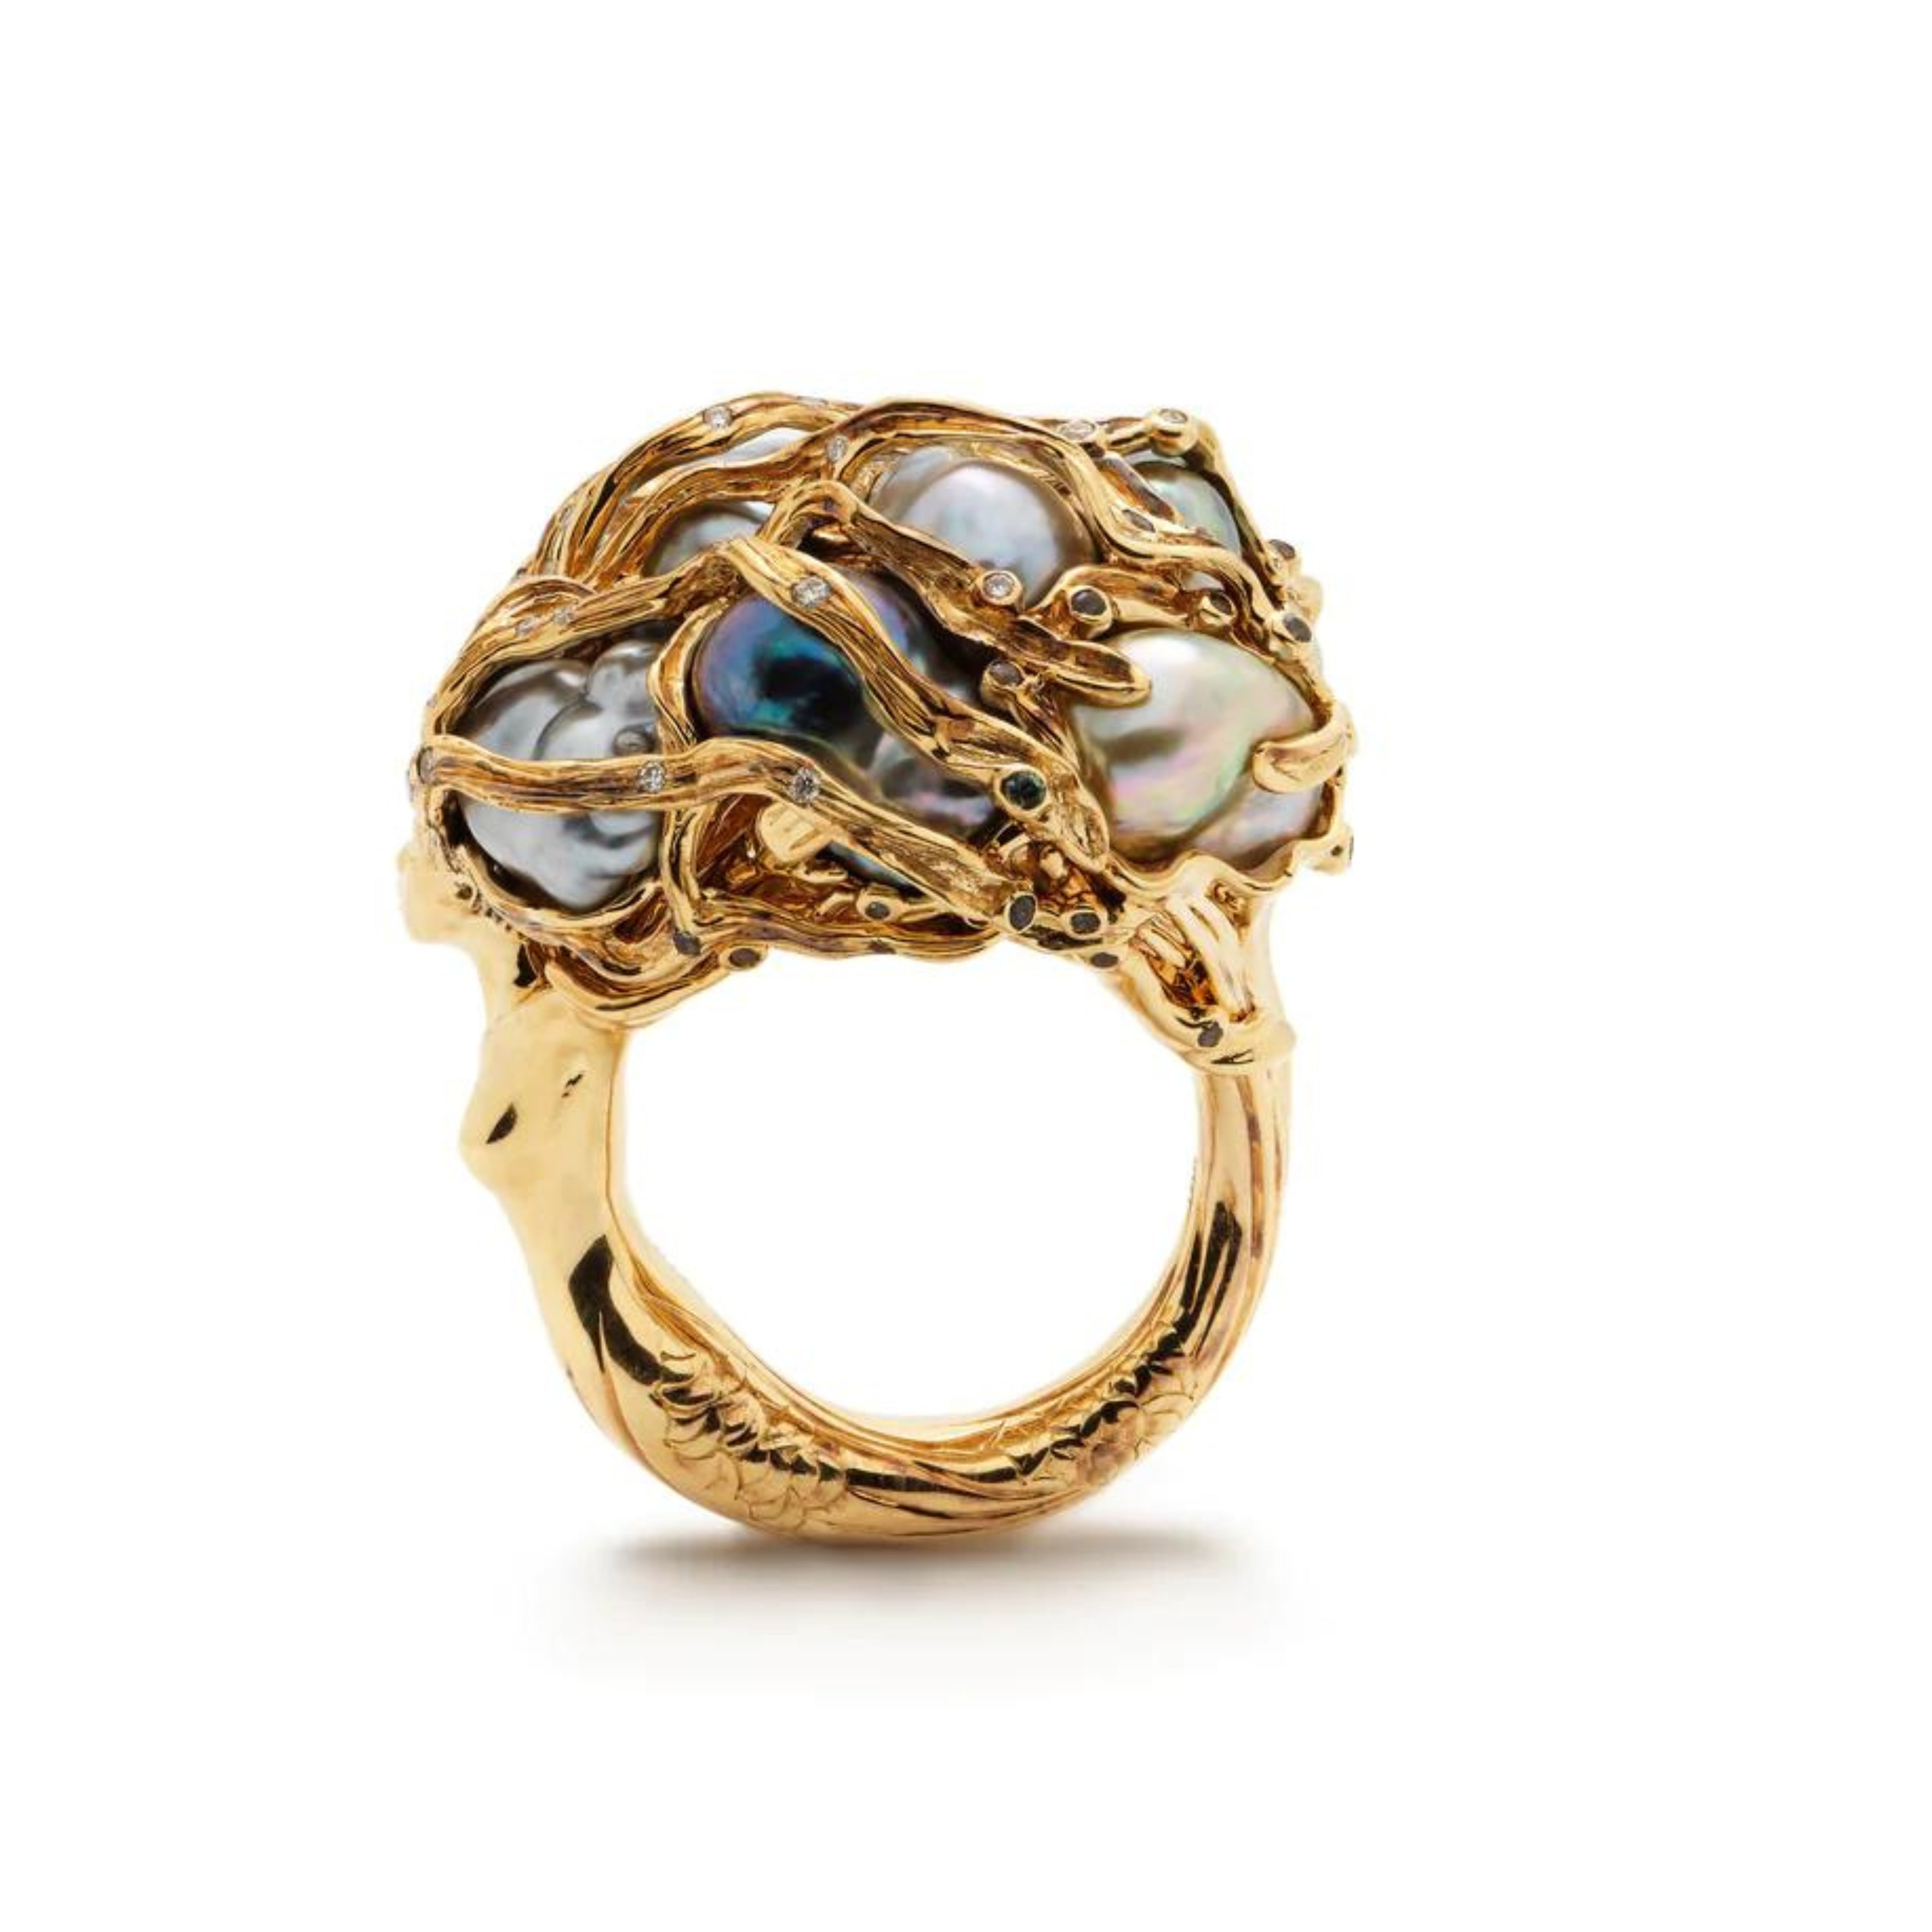 Bibi van der Velden, Sea Goddess Ring Crafted from 18K yellow gold, this cocktail ring features a mermaid's body serving as its band, with it's hair intertwined with  keshi pearls and tsavorites. Olive-green enameling symbolizing the flora of the seabed completes the nature-inspired aesthetic.